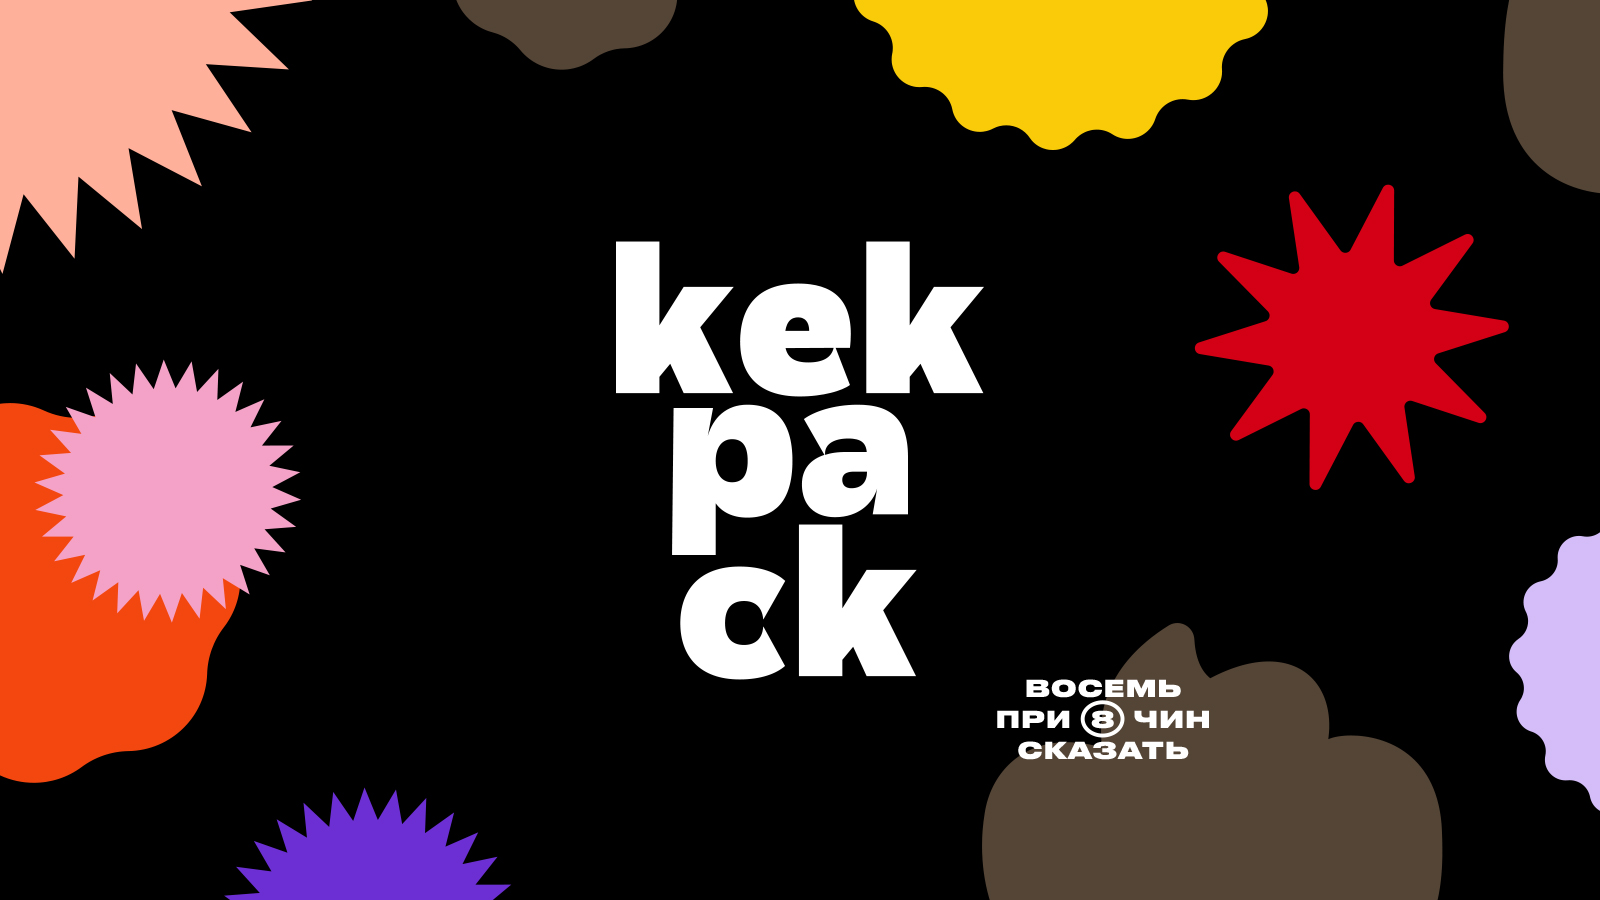 Evgeniy Khizovets Creates Brand and Packaging for Kekpack, a Eco Bags for Dog Poop Productt